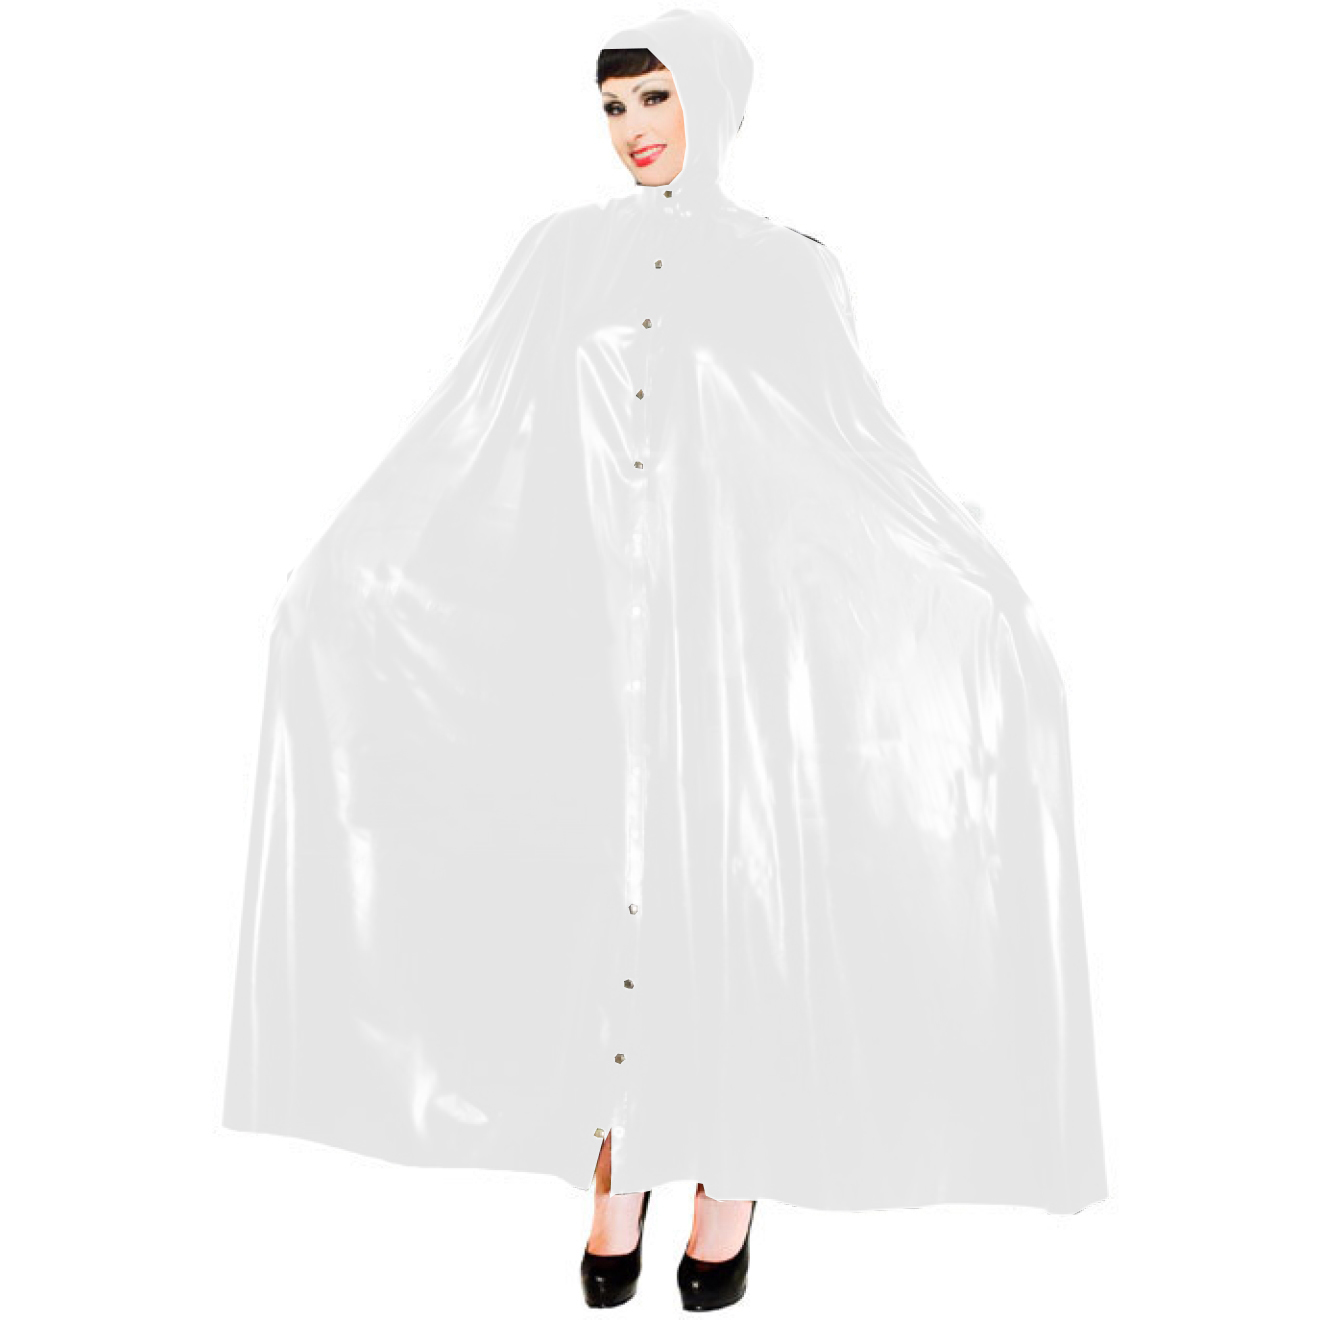 Sexy Wetlook PVC Long Capes with Hood Women Ponchos Faux Latex Robe Coat  Button-up Party Costumes Club Windbreaker Cloaks S-7XL